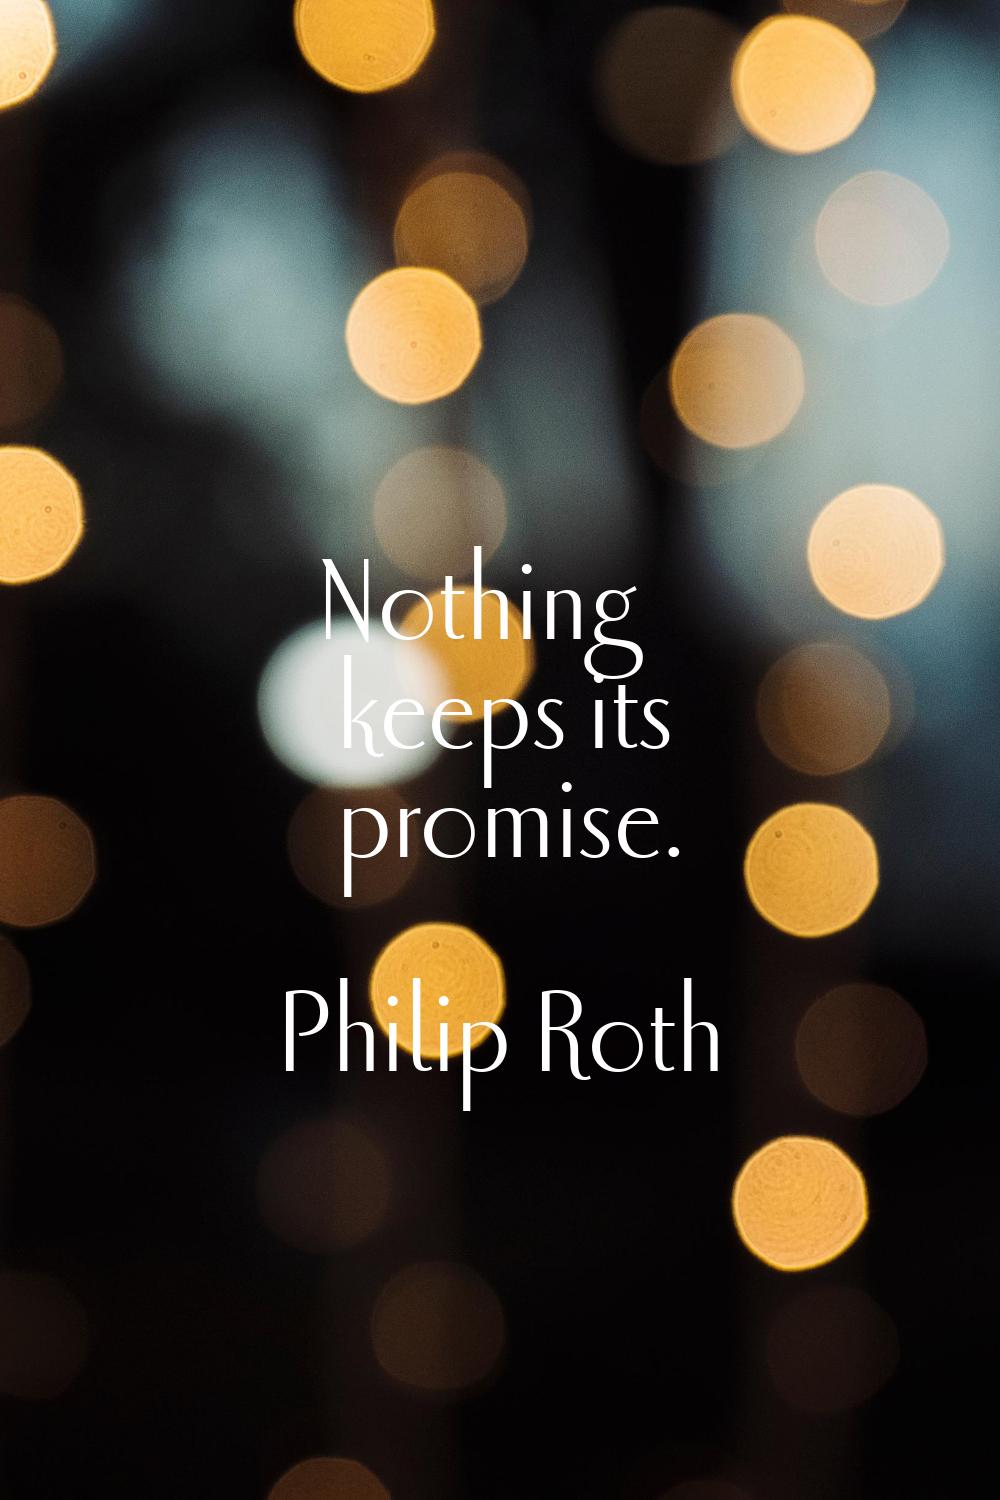 Nothing keeps its promise.